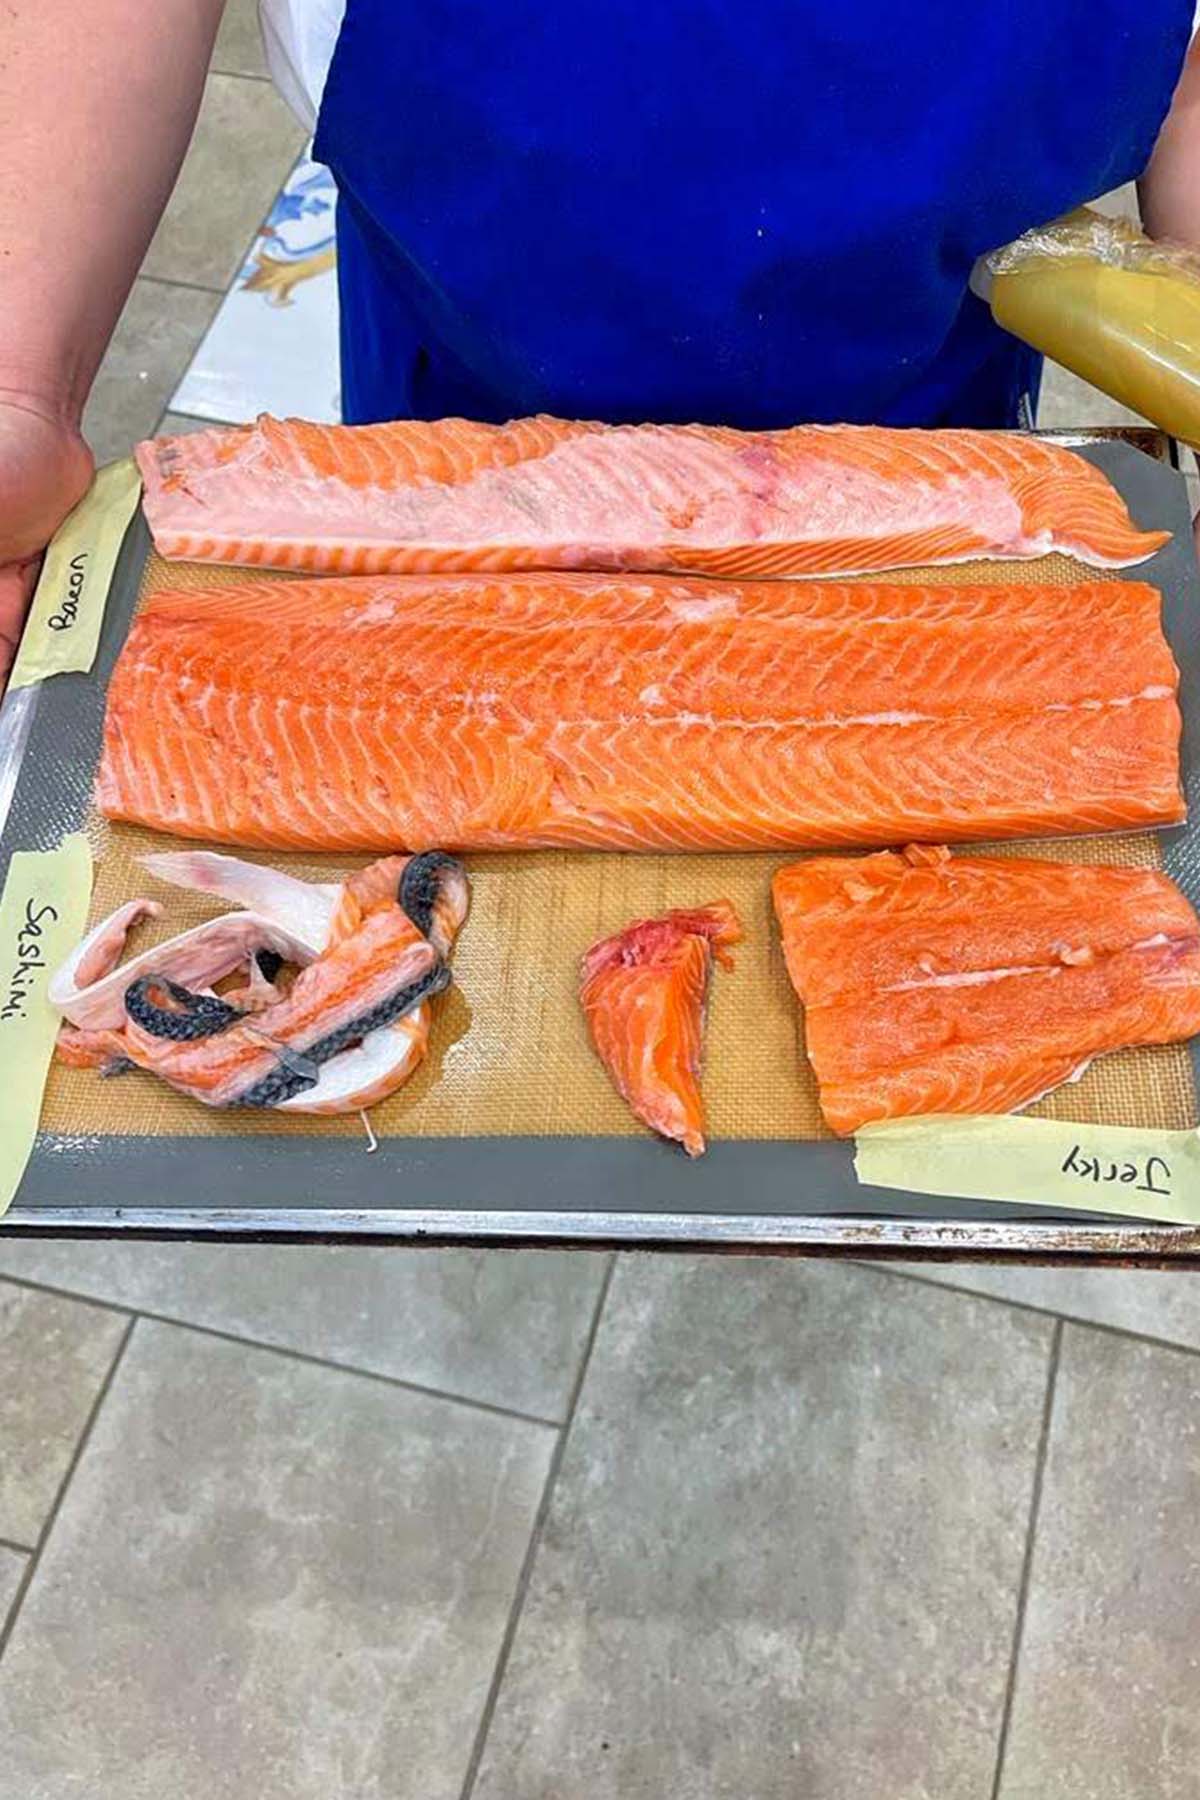 fabricated salmon cut into parts for jerky, sashimi, and bacon.